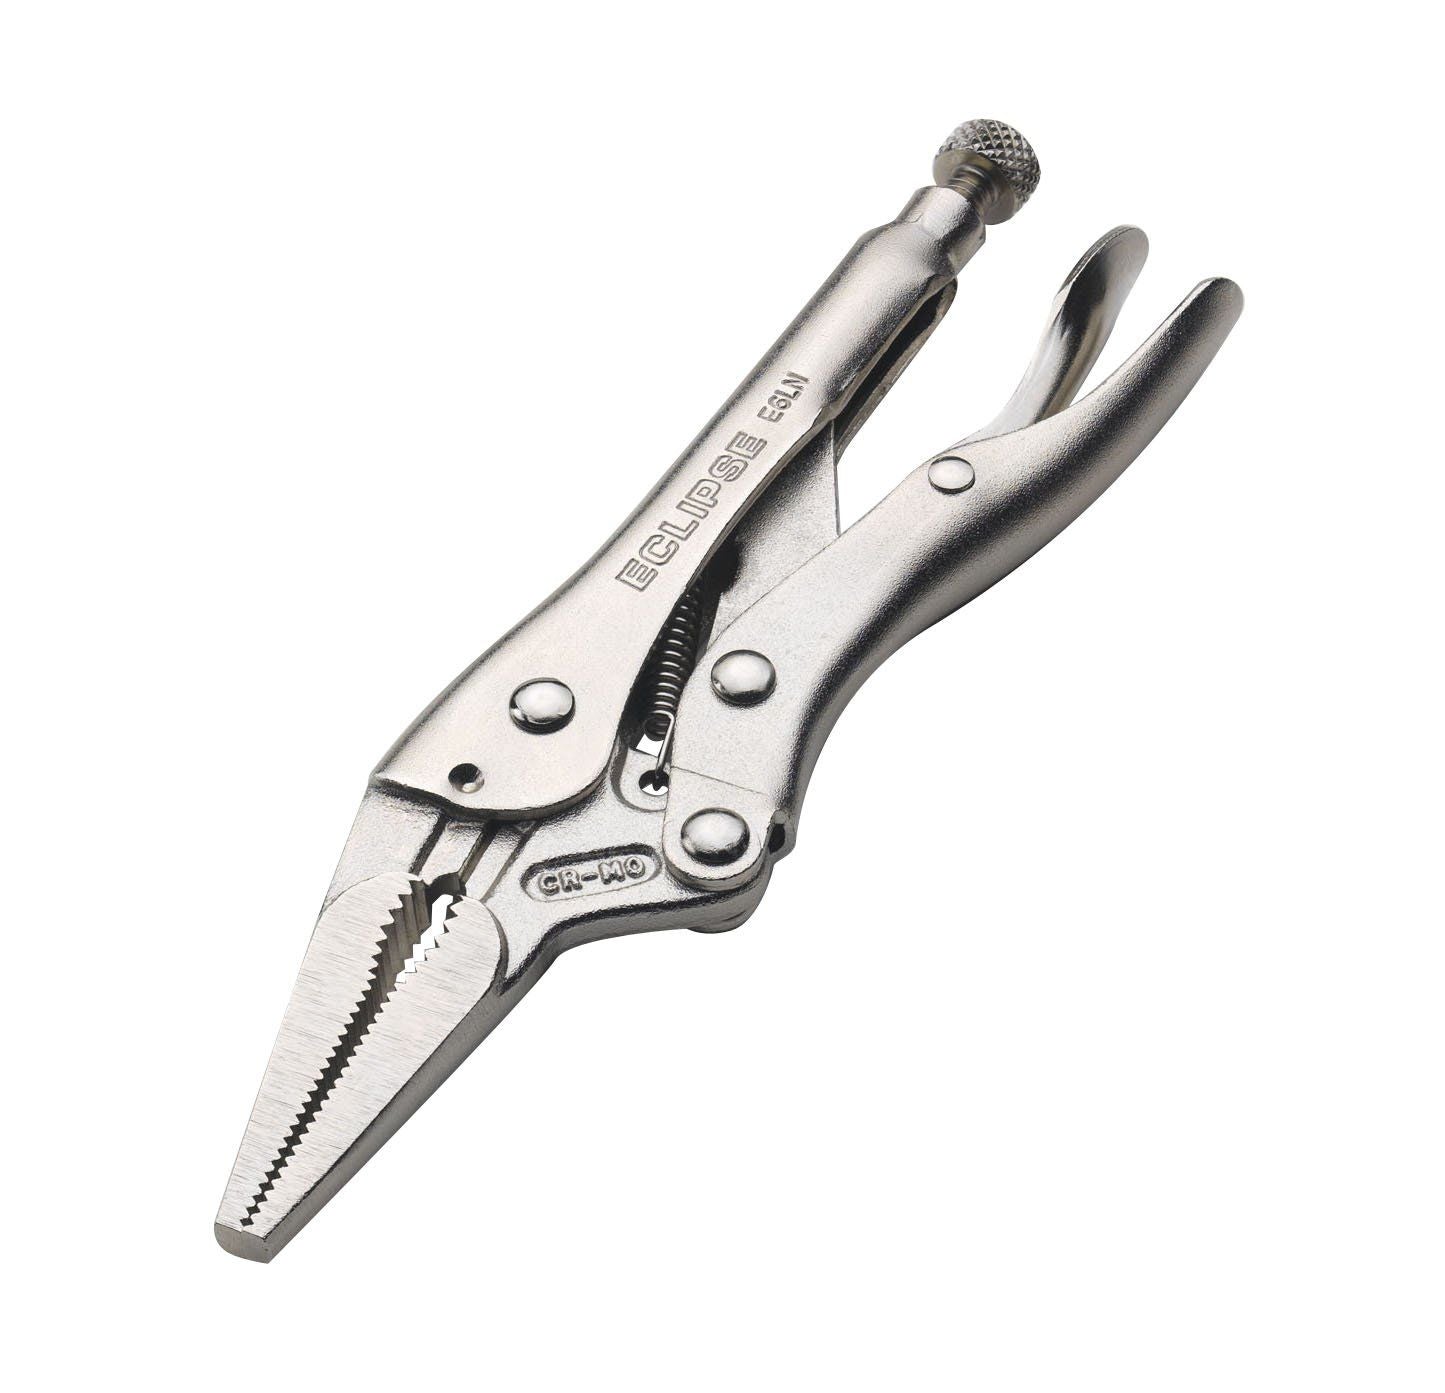 Long Nose Locking Pliers with Swivel Cutters in Chrome Molybdenum Steel, 6" Size, 2" Jaw Capacity